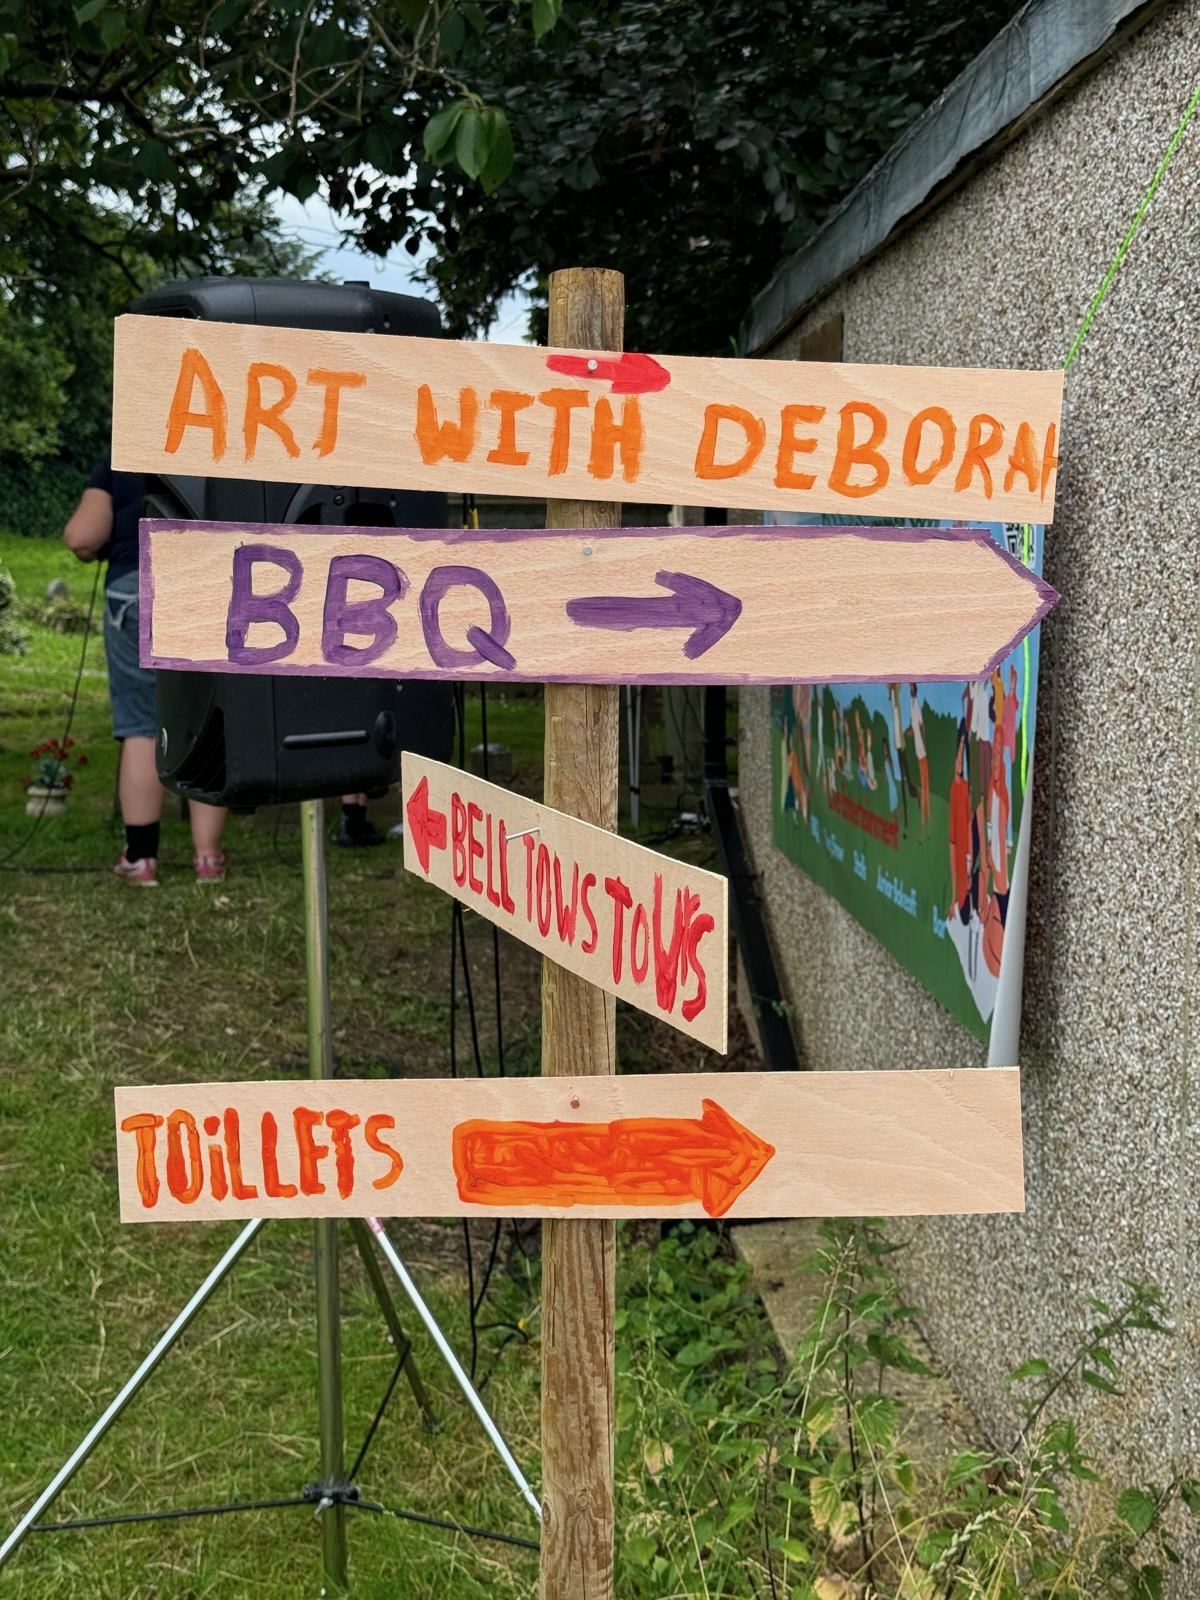 Sign post showing Art with Deborah, BBQ, Tower Tours, Toilets